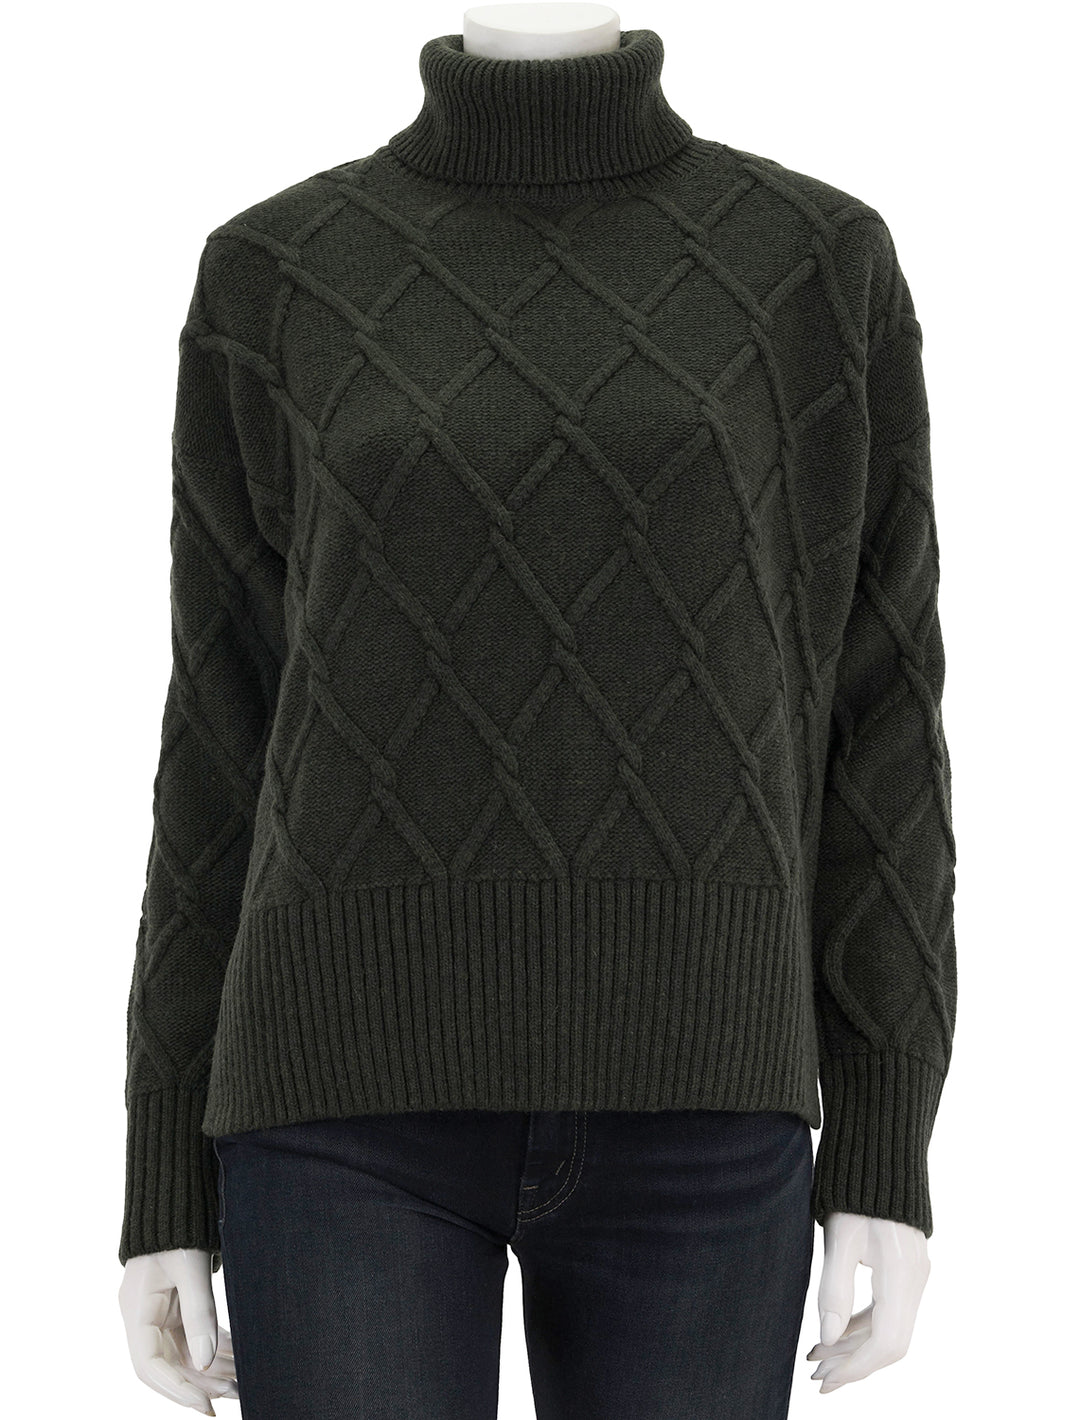 Front view of Barbour's perch knit turtleneck in olive.